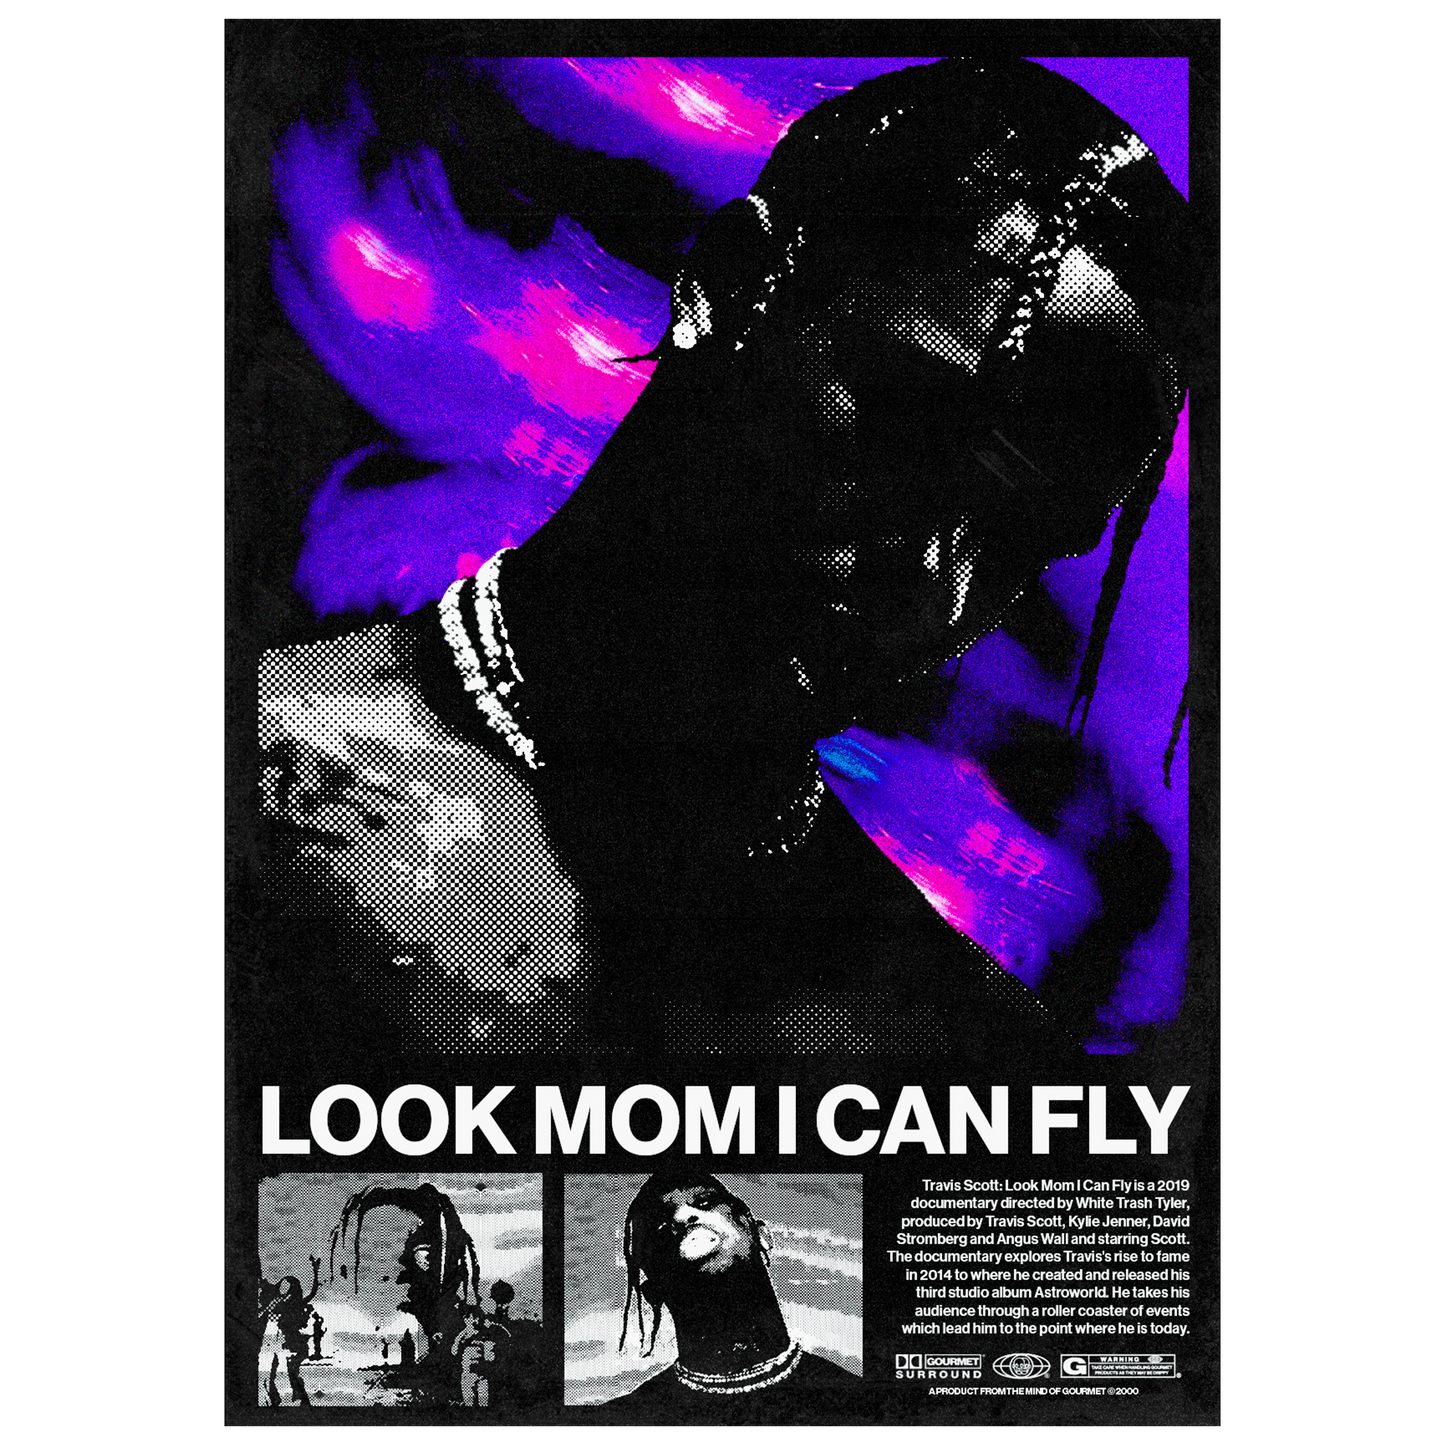 LOOK MOM I CAN FLY POSTER